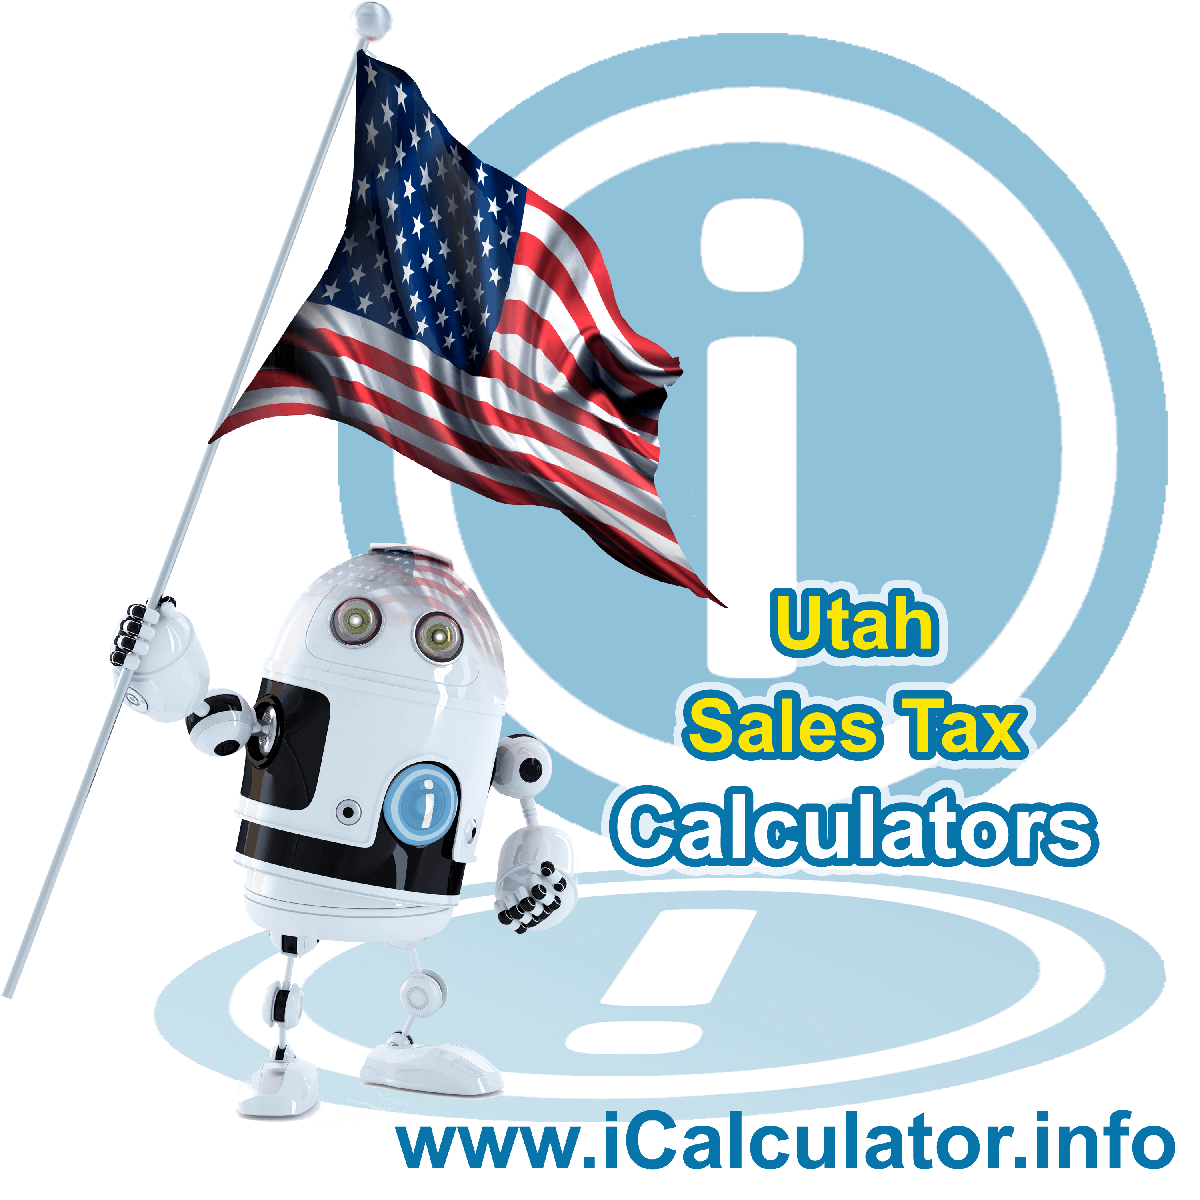 Summit County Sales Rates: This image illustrates a calculator robot calculating Summit County sales tax manually using the Summit County Sales Tax Formula. You can use this information to calculate Summit County Sales Tax manually or use the Summit County Sales Tax Calculator to calculate sales tax online.